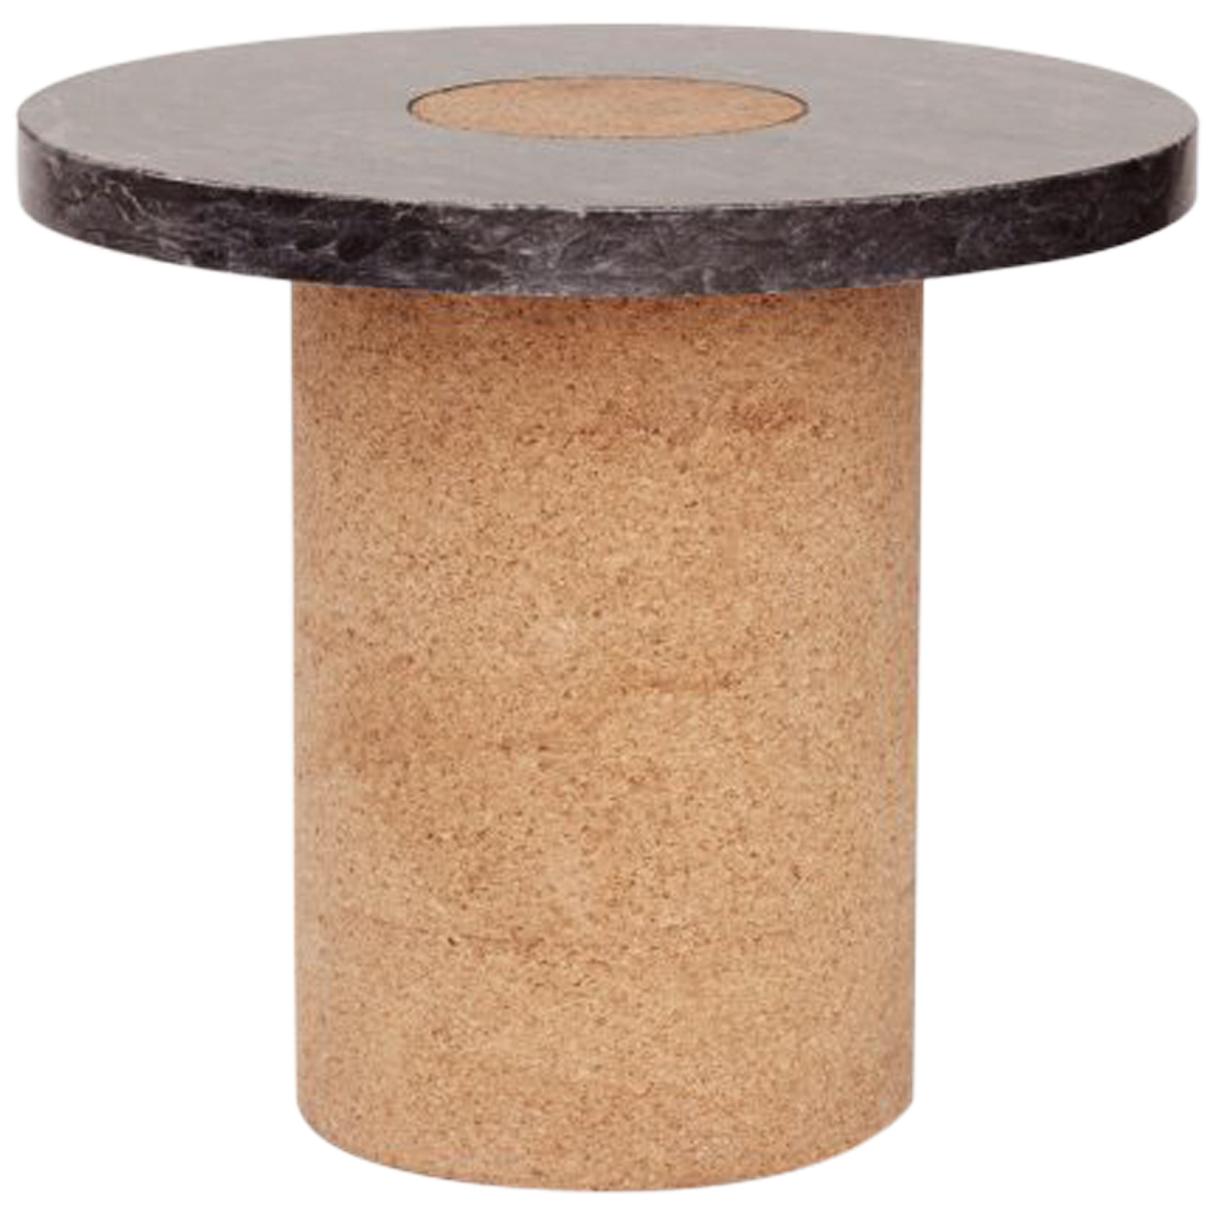 FRAMA Contemporary Sintra Table Small with Black Marble and Natural Cork For Sale